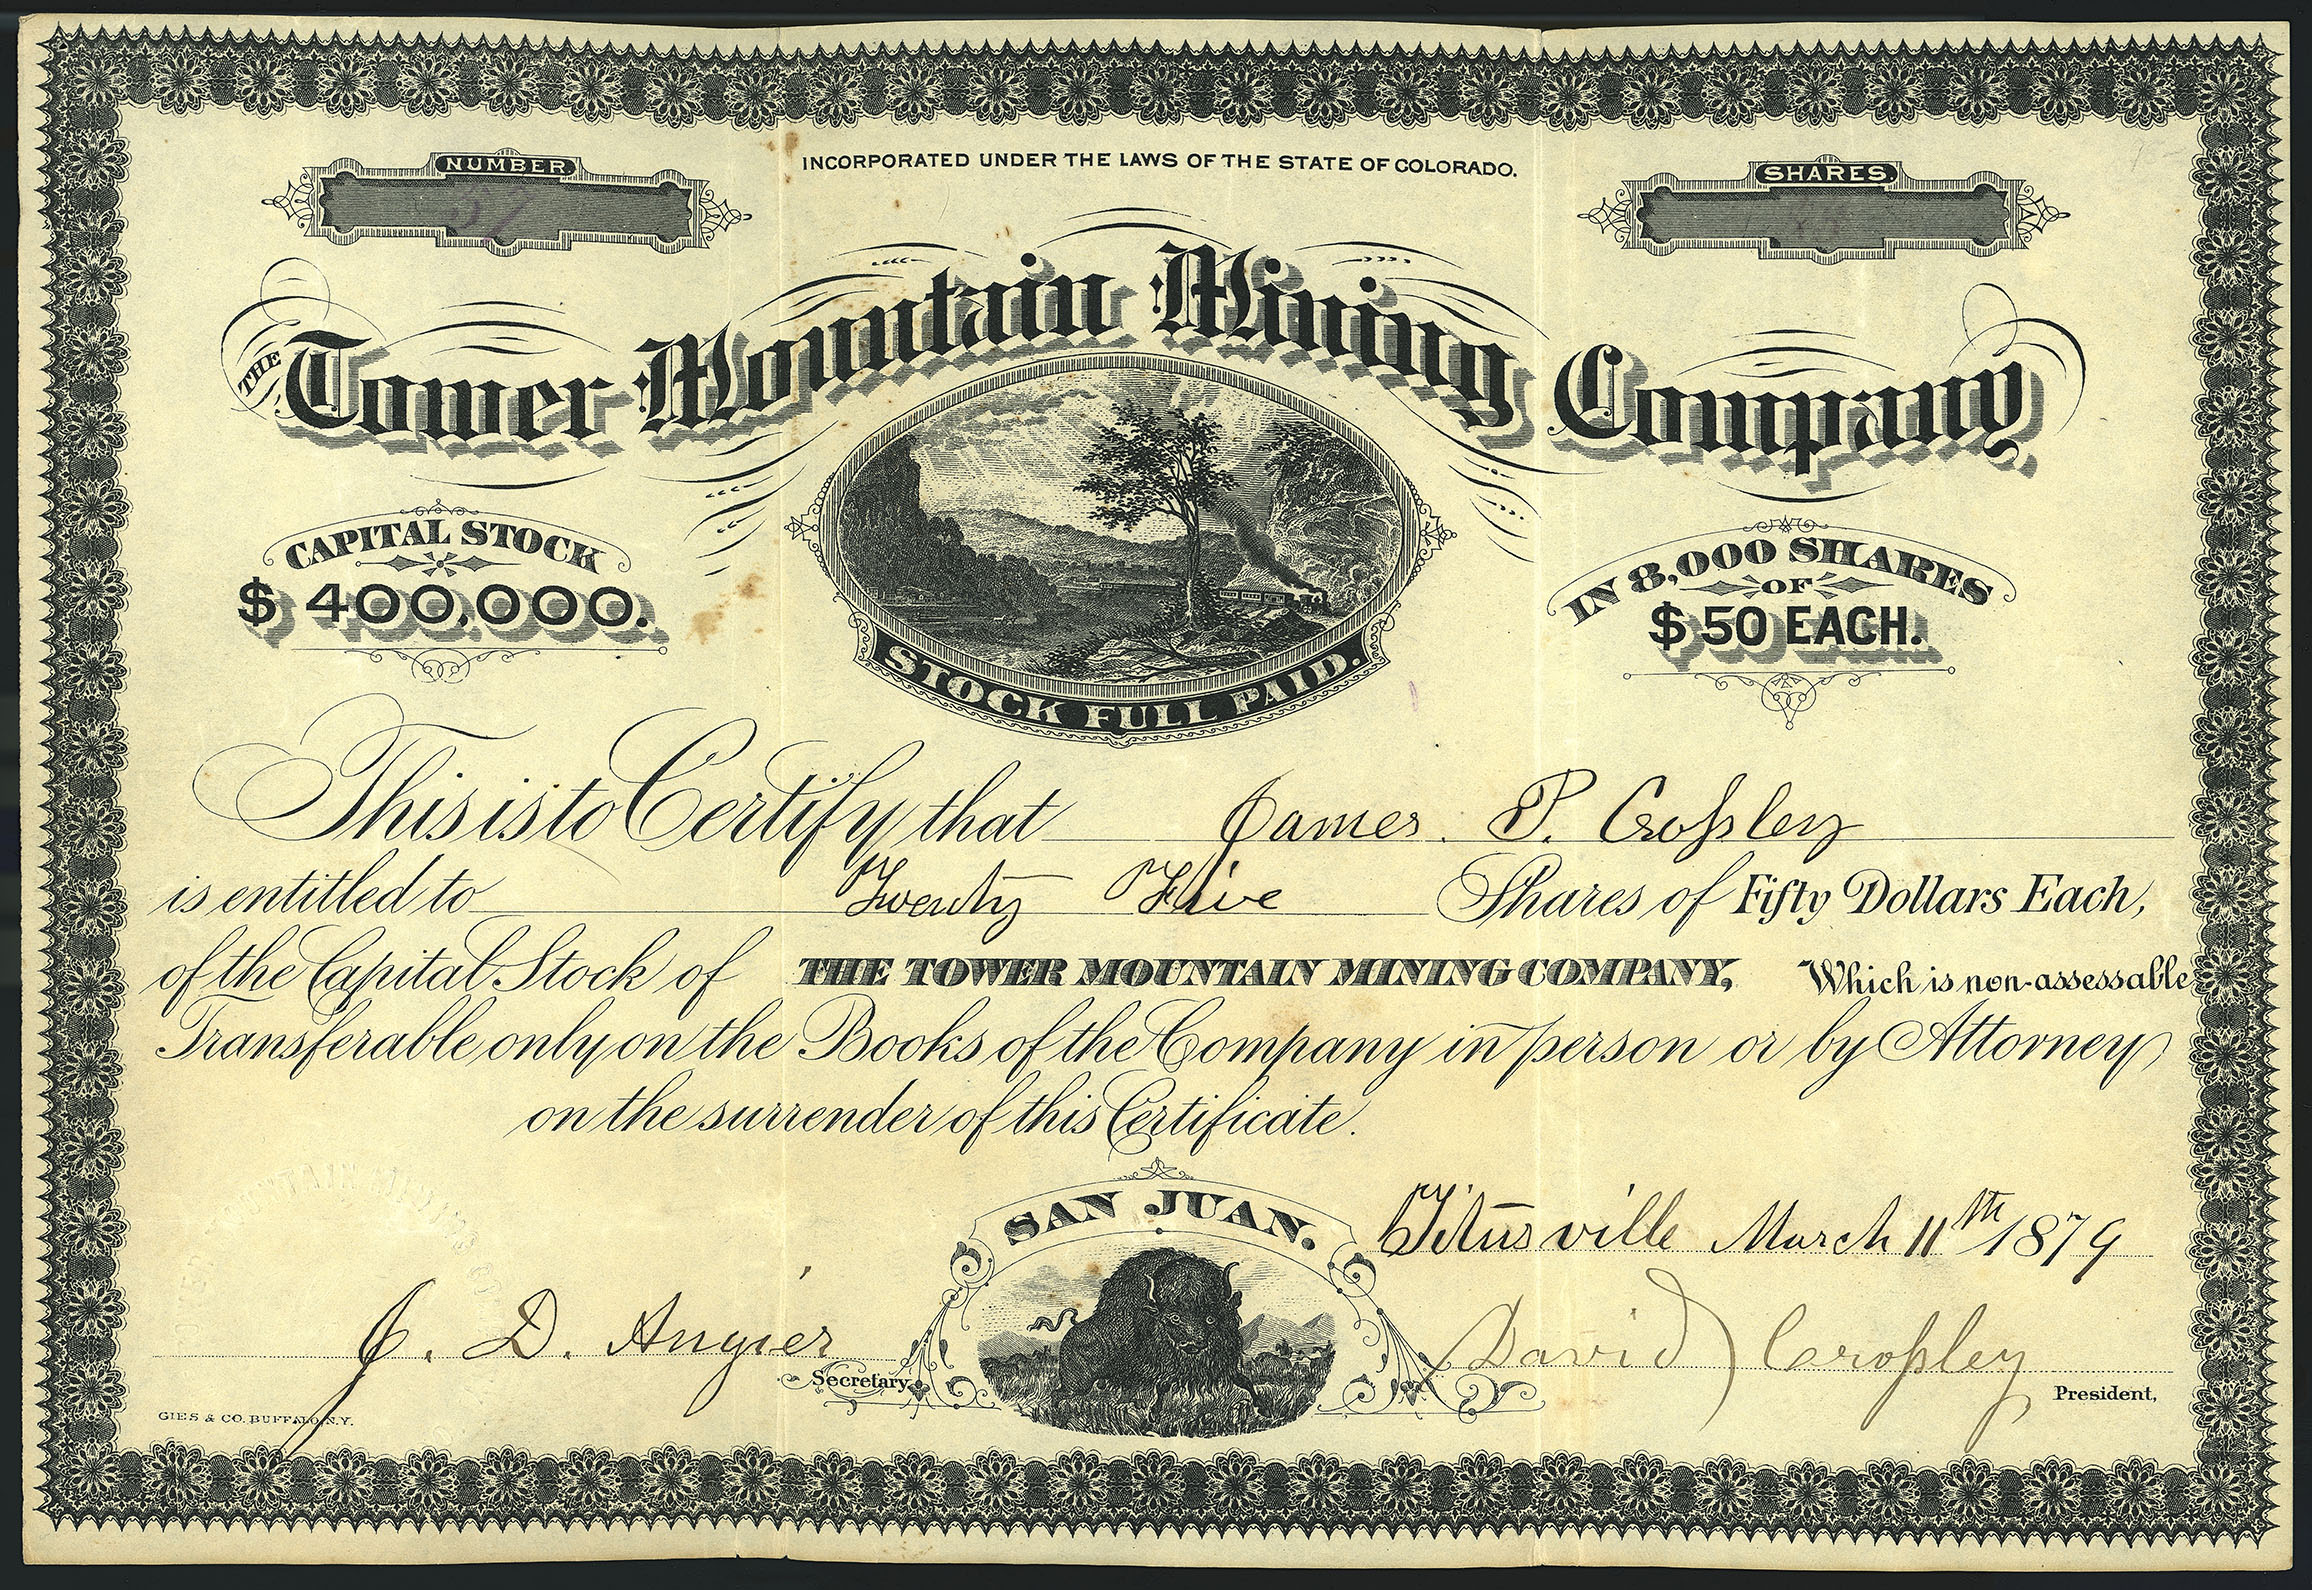 TOWER MOUNTAIN MINING COMPANY stock certificate, 1879